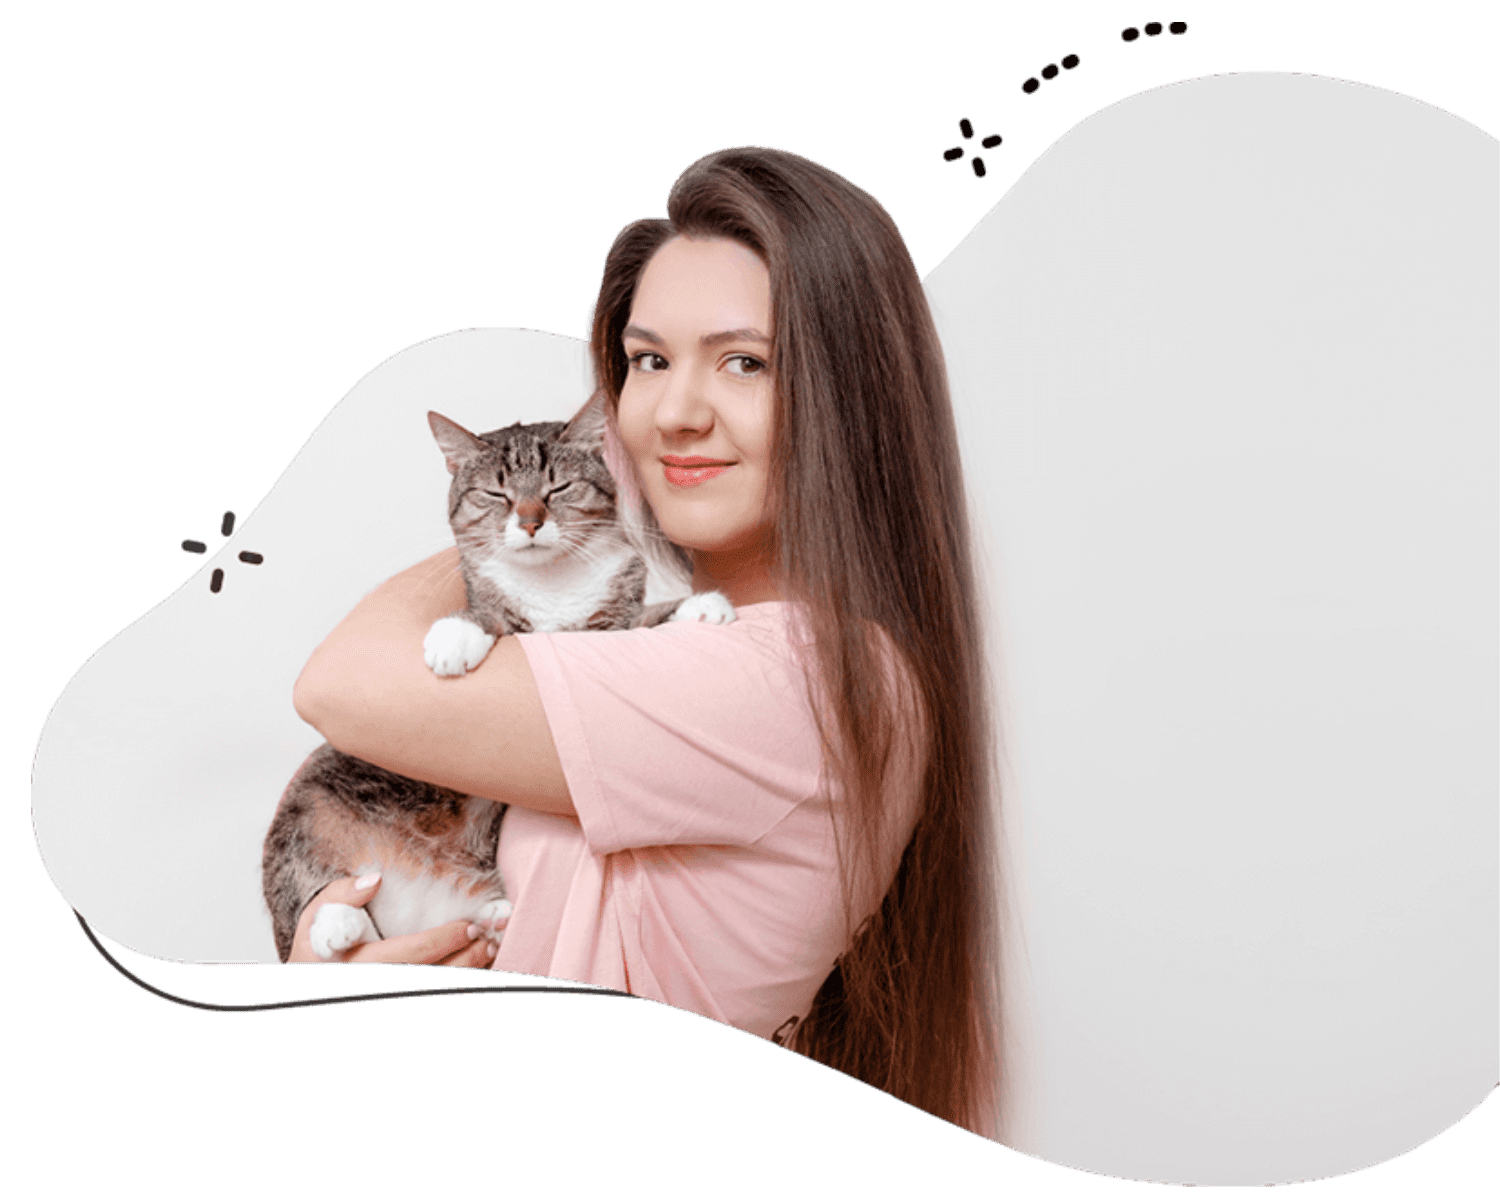 Female cat sitter in a pink tee shirt holding a British longhair cat in her arms who provides cat sitting services